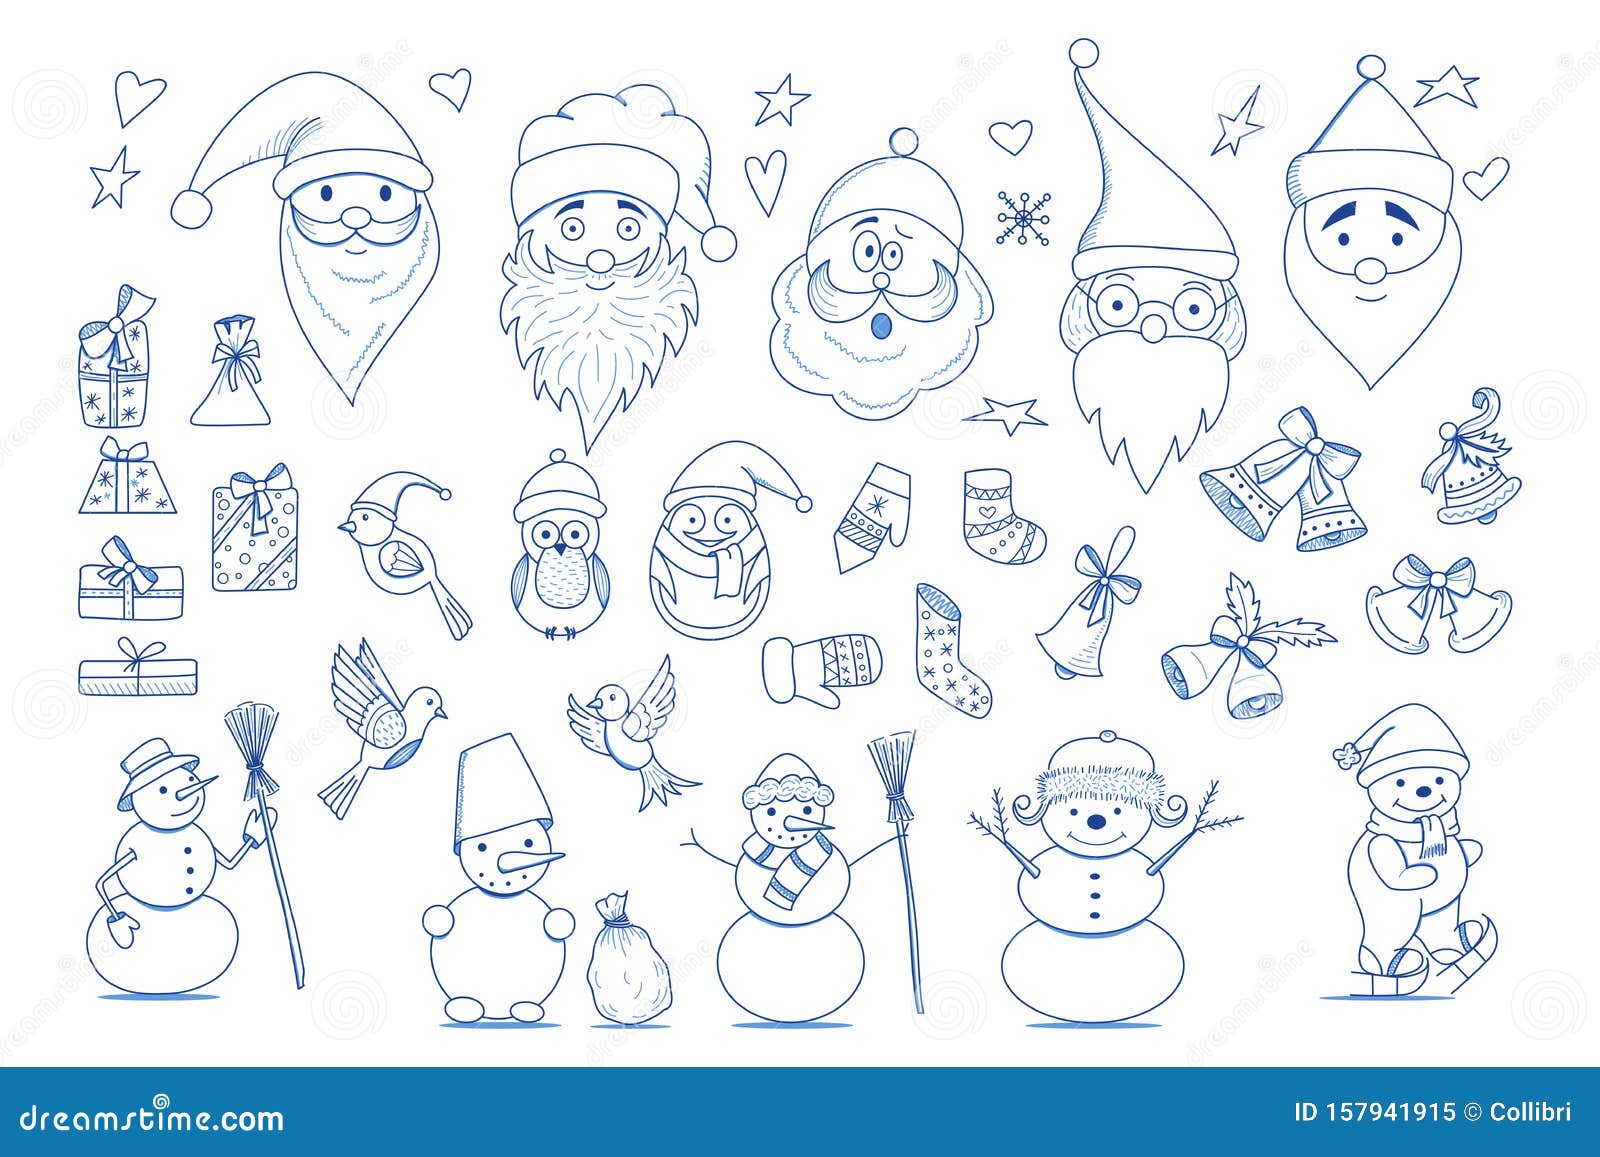 Funny Cartoon Christmas Collection Element in Doodle Sketch Style in ...